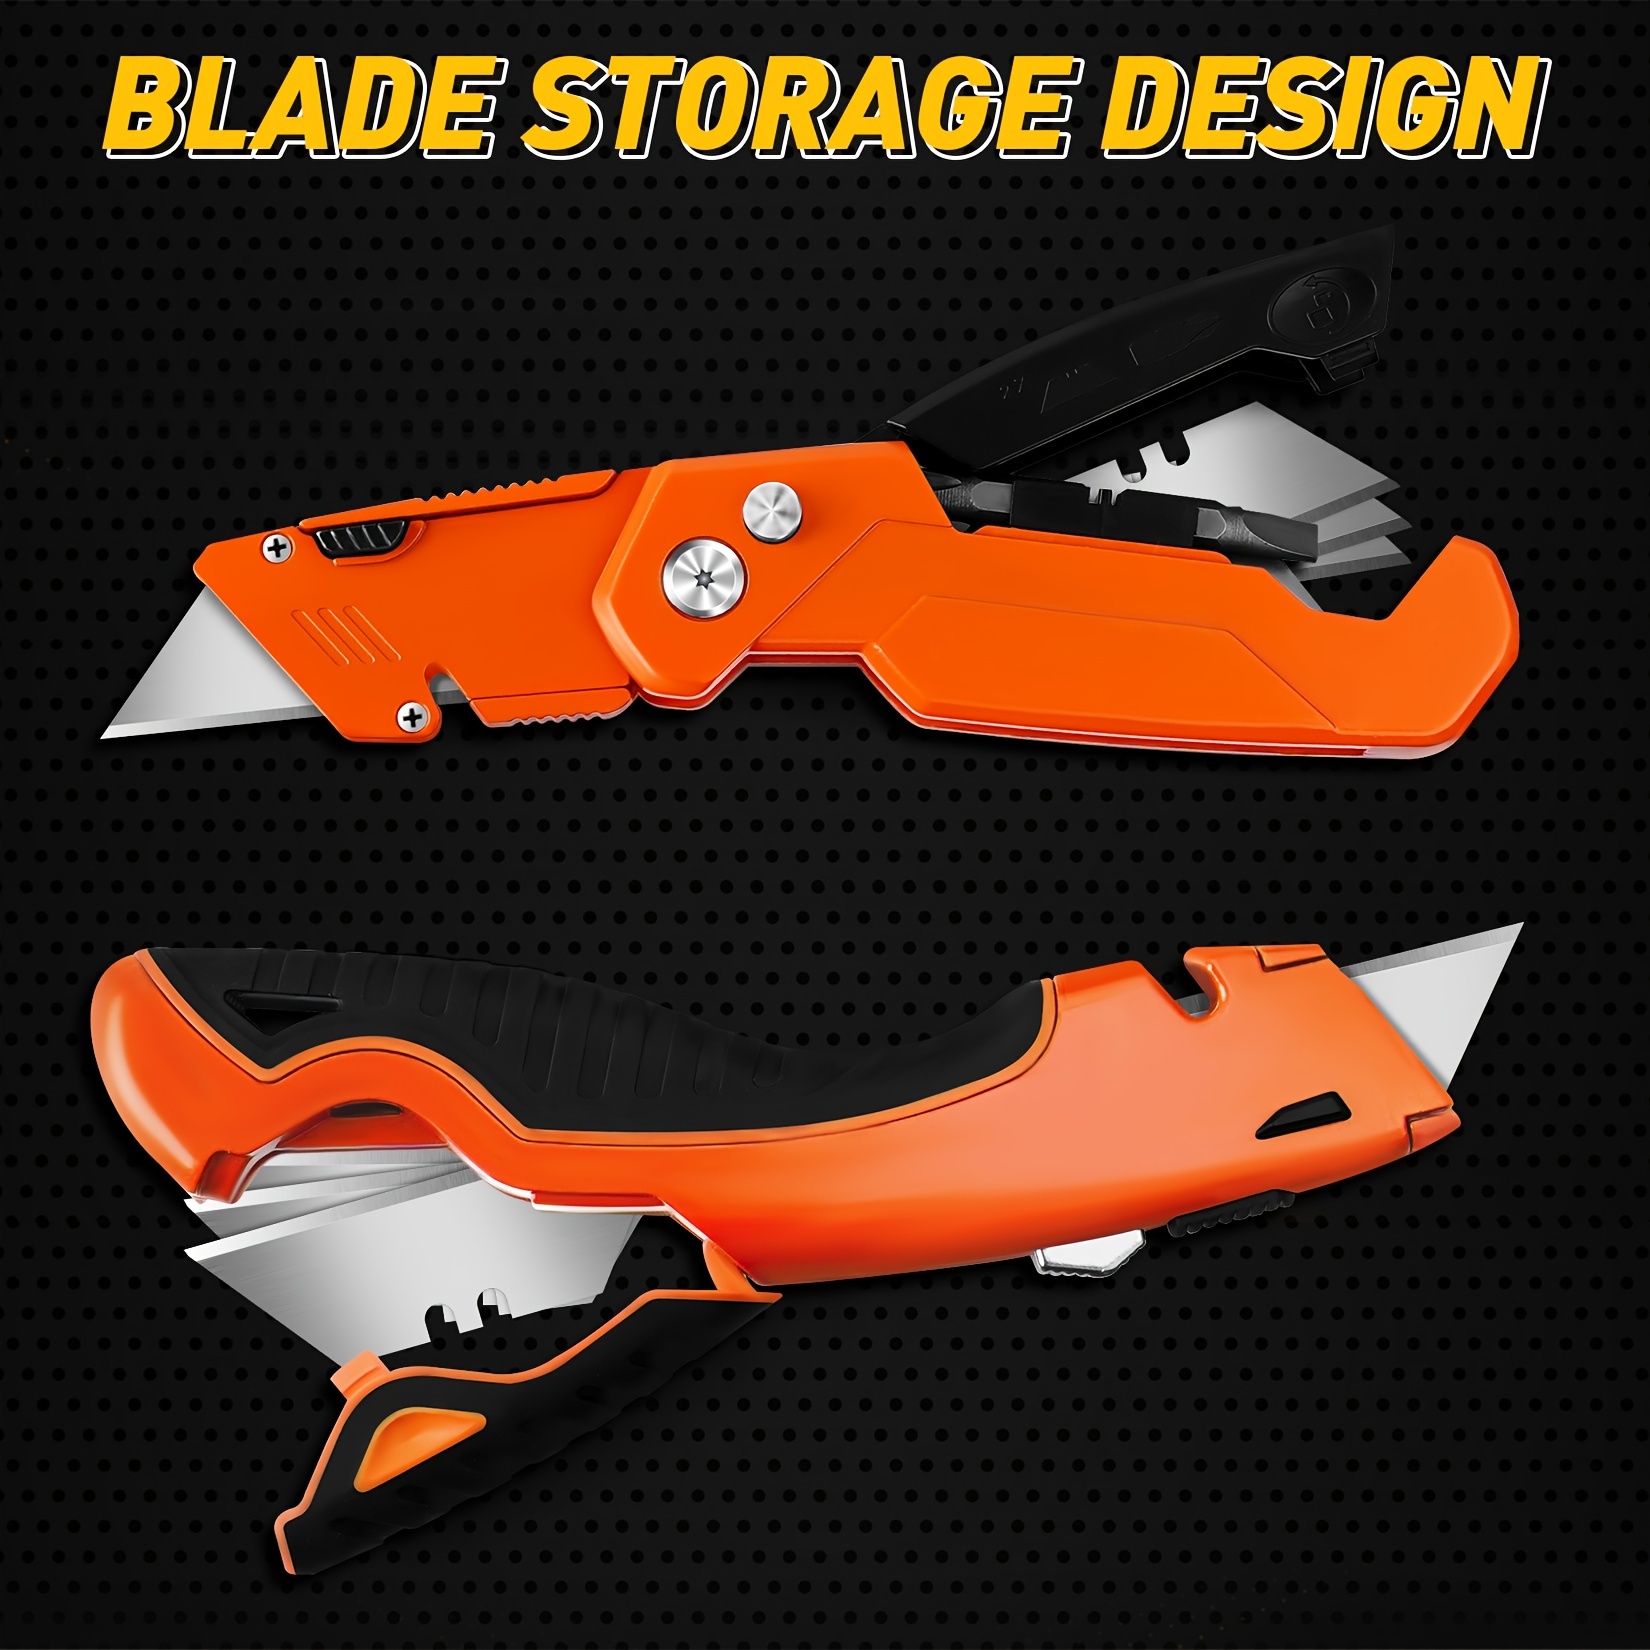 2 Pack Utility Knife, Box Cutter Retractable, Heavy Duty Small Box Knife  Exacto Knife, Comfortable Aluminum Handle, Sharp Blade, Box Opener For  Cardboard, Boxes, Carpet, Shop Now For Limited-time Deals